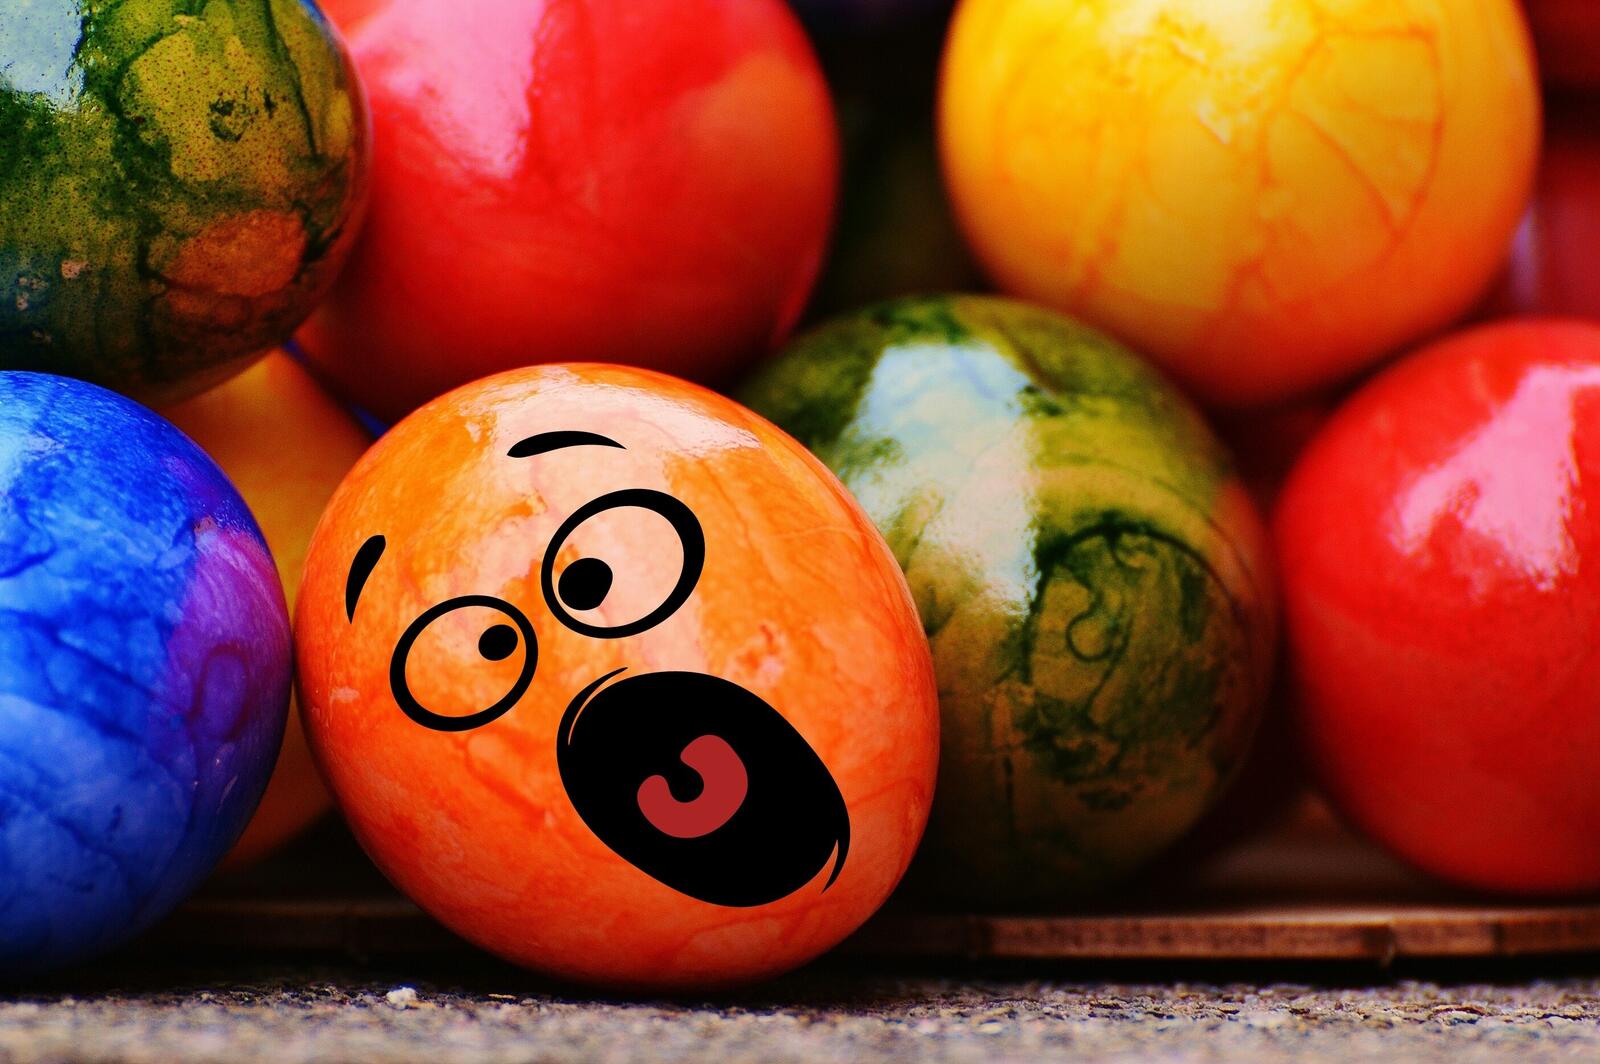 Free photo Easter egg with a screaming smiley face